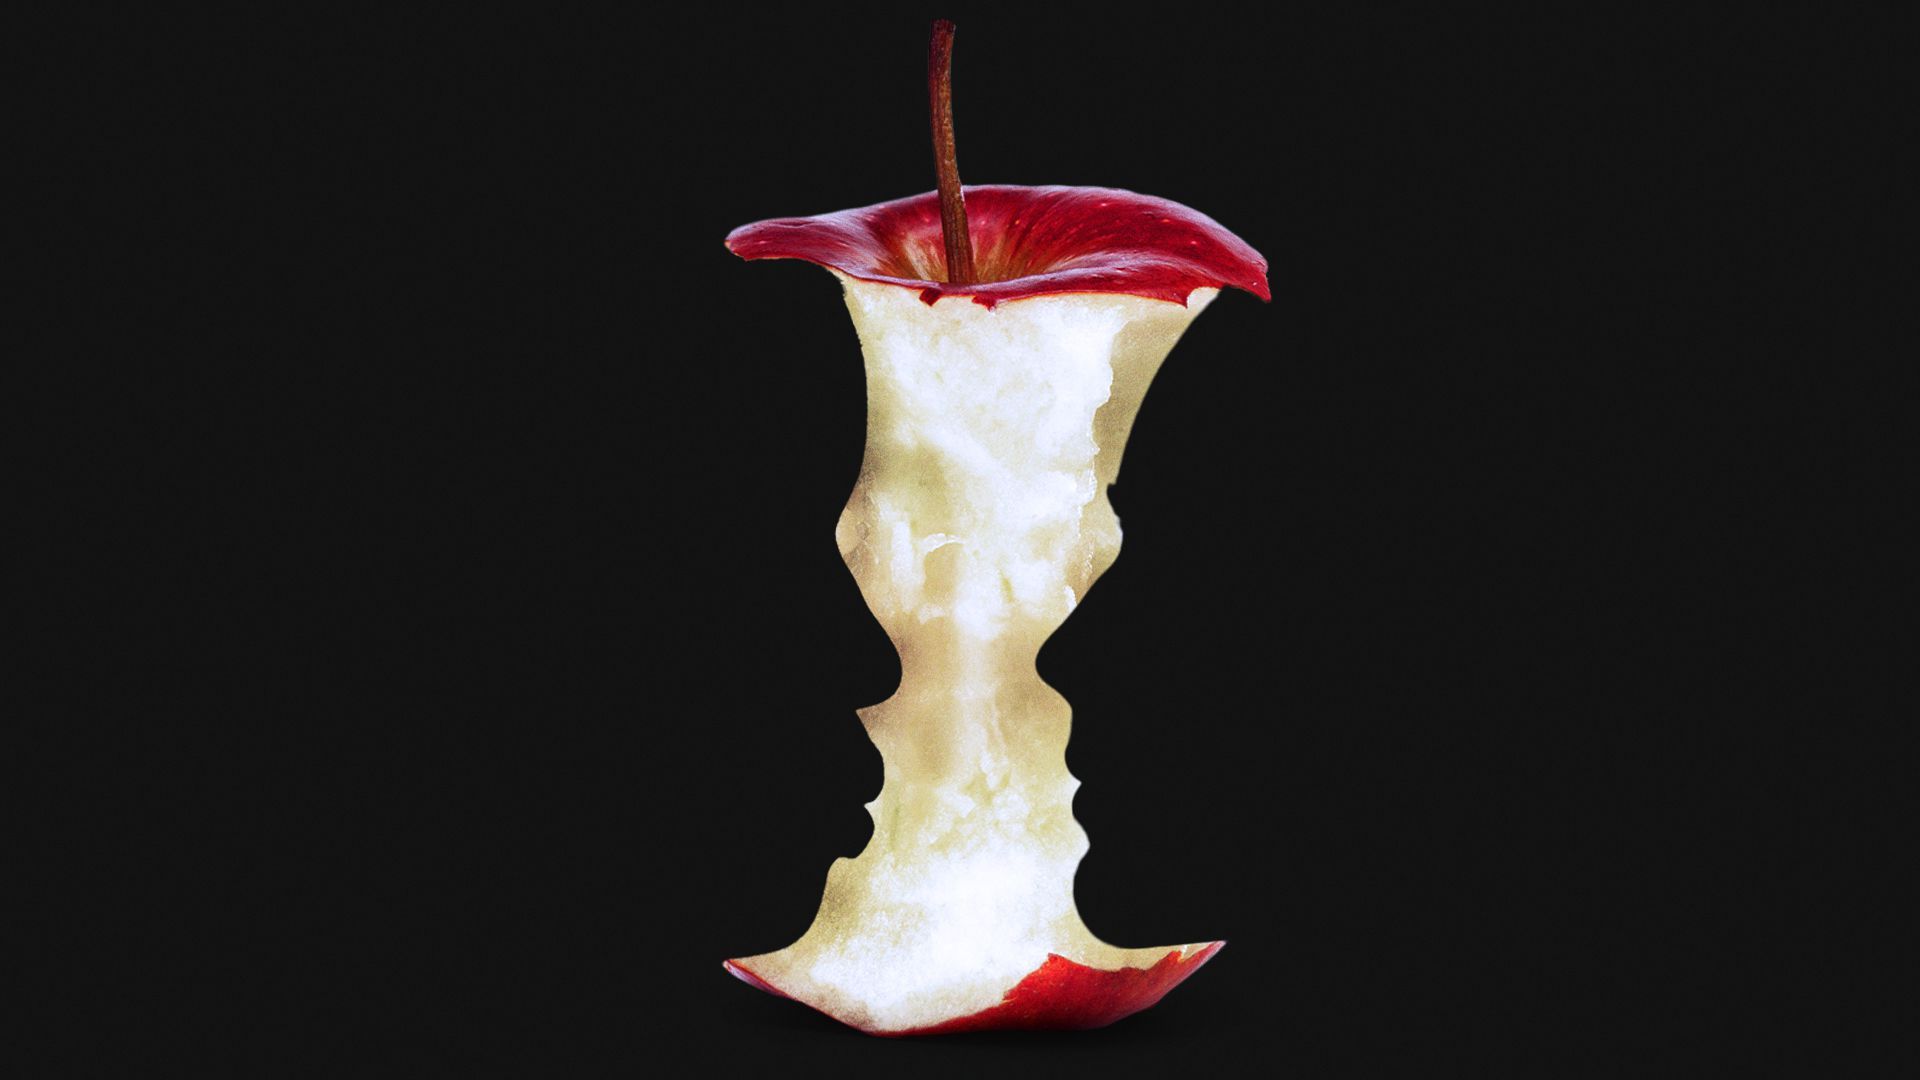 Illustration of an apple core with a Black student and a white student silhouetted on each side.